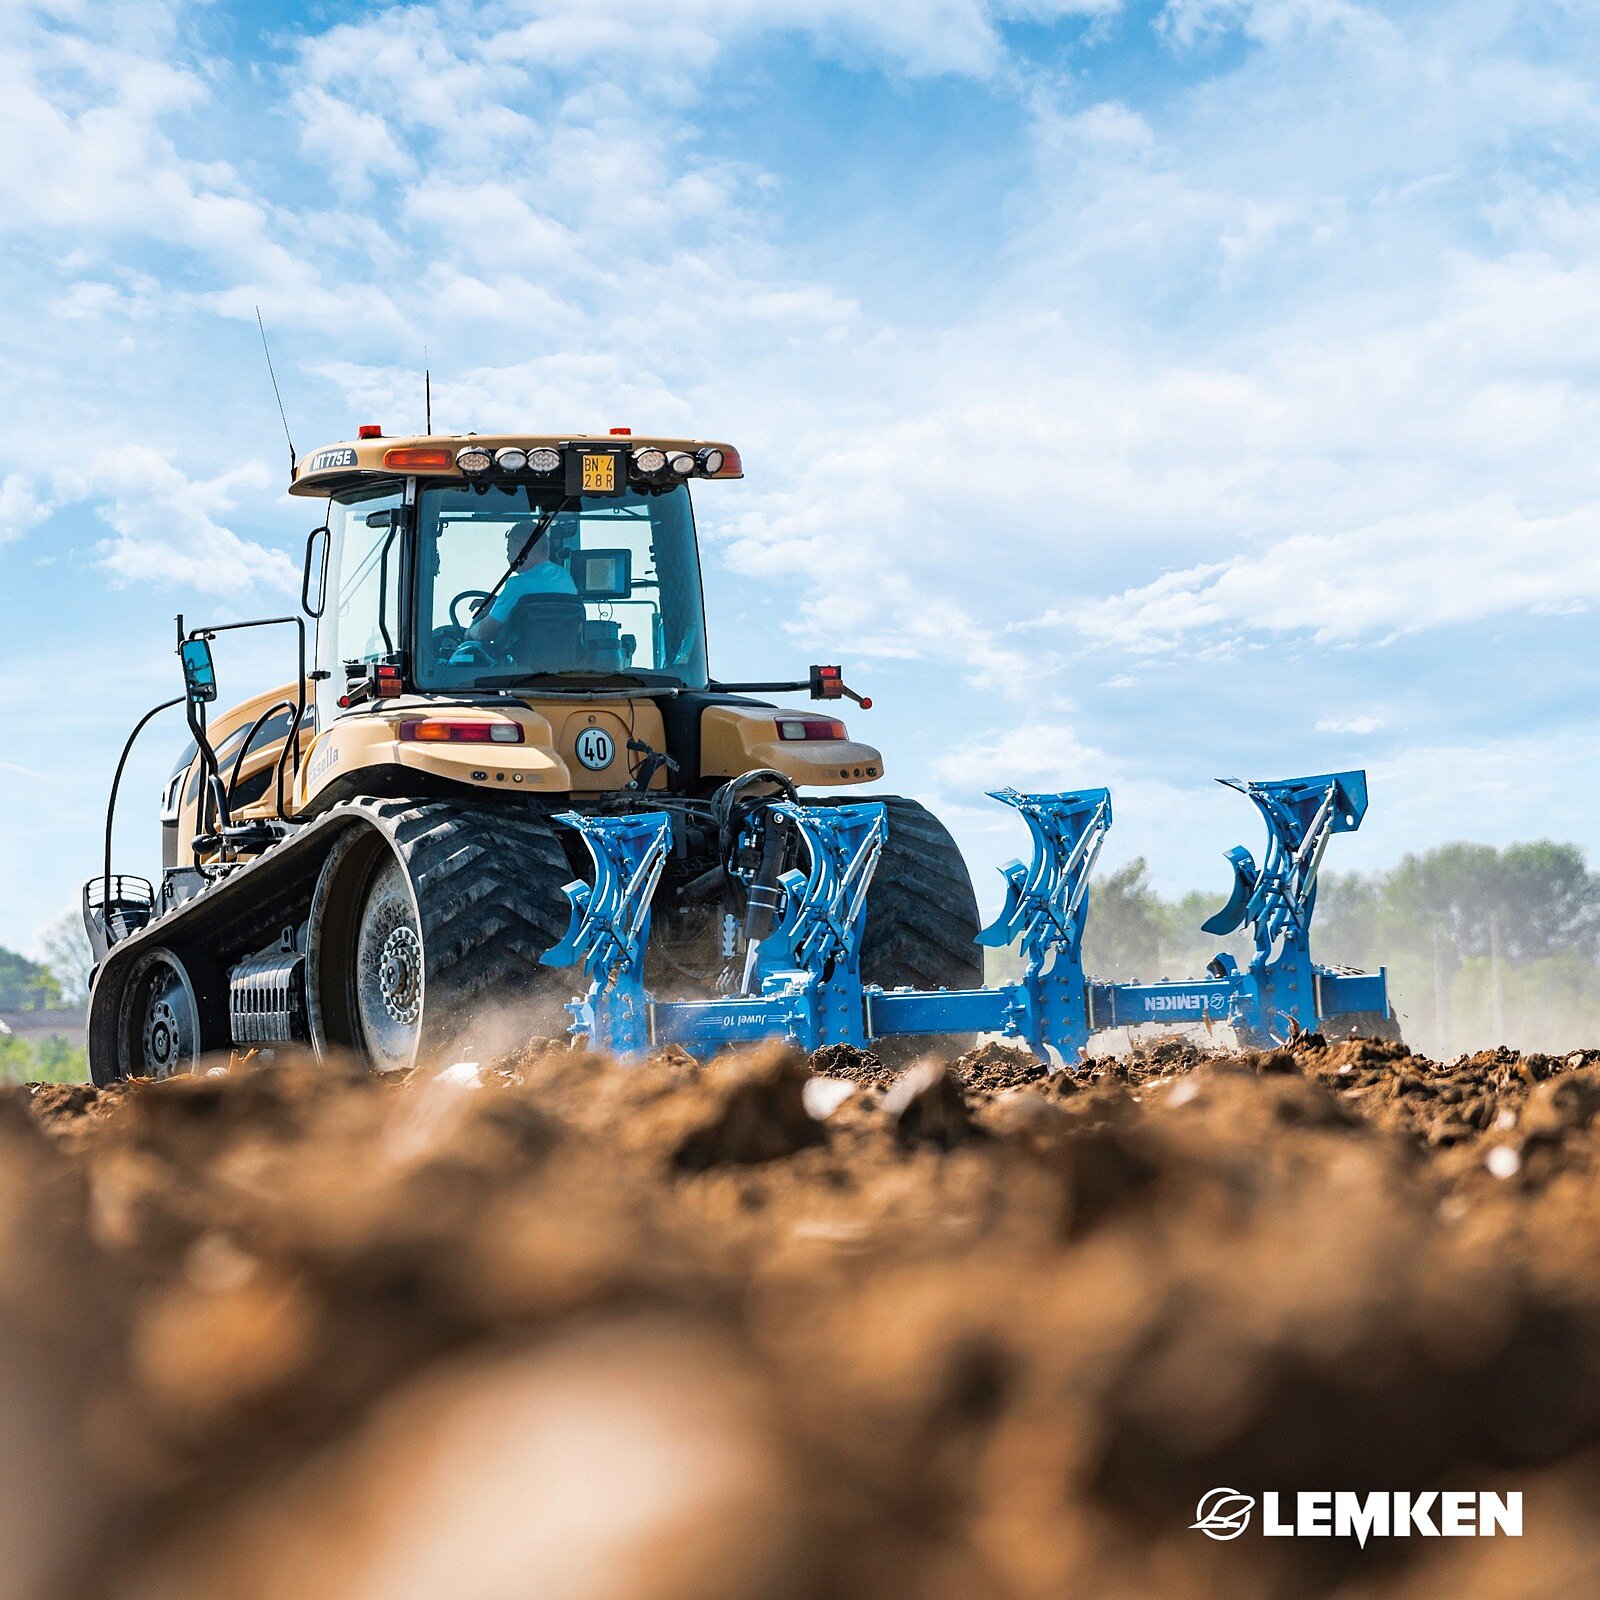 The LEMKEN Juwel 10 has worked its way deep into the hearts of our customers - powerful, precise and always ready! 💙